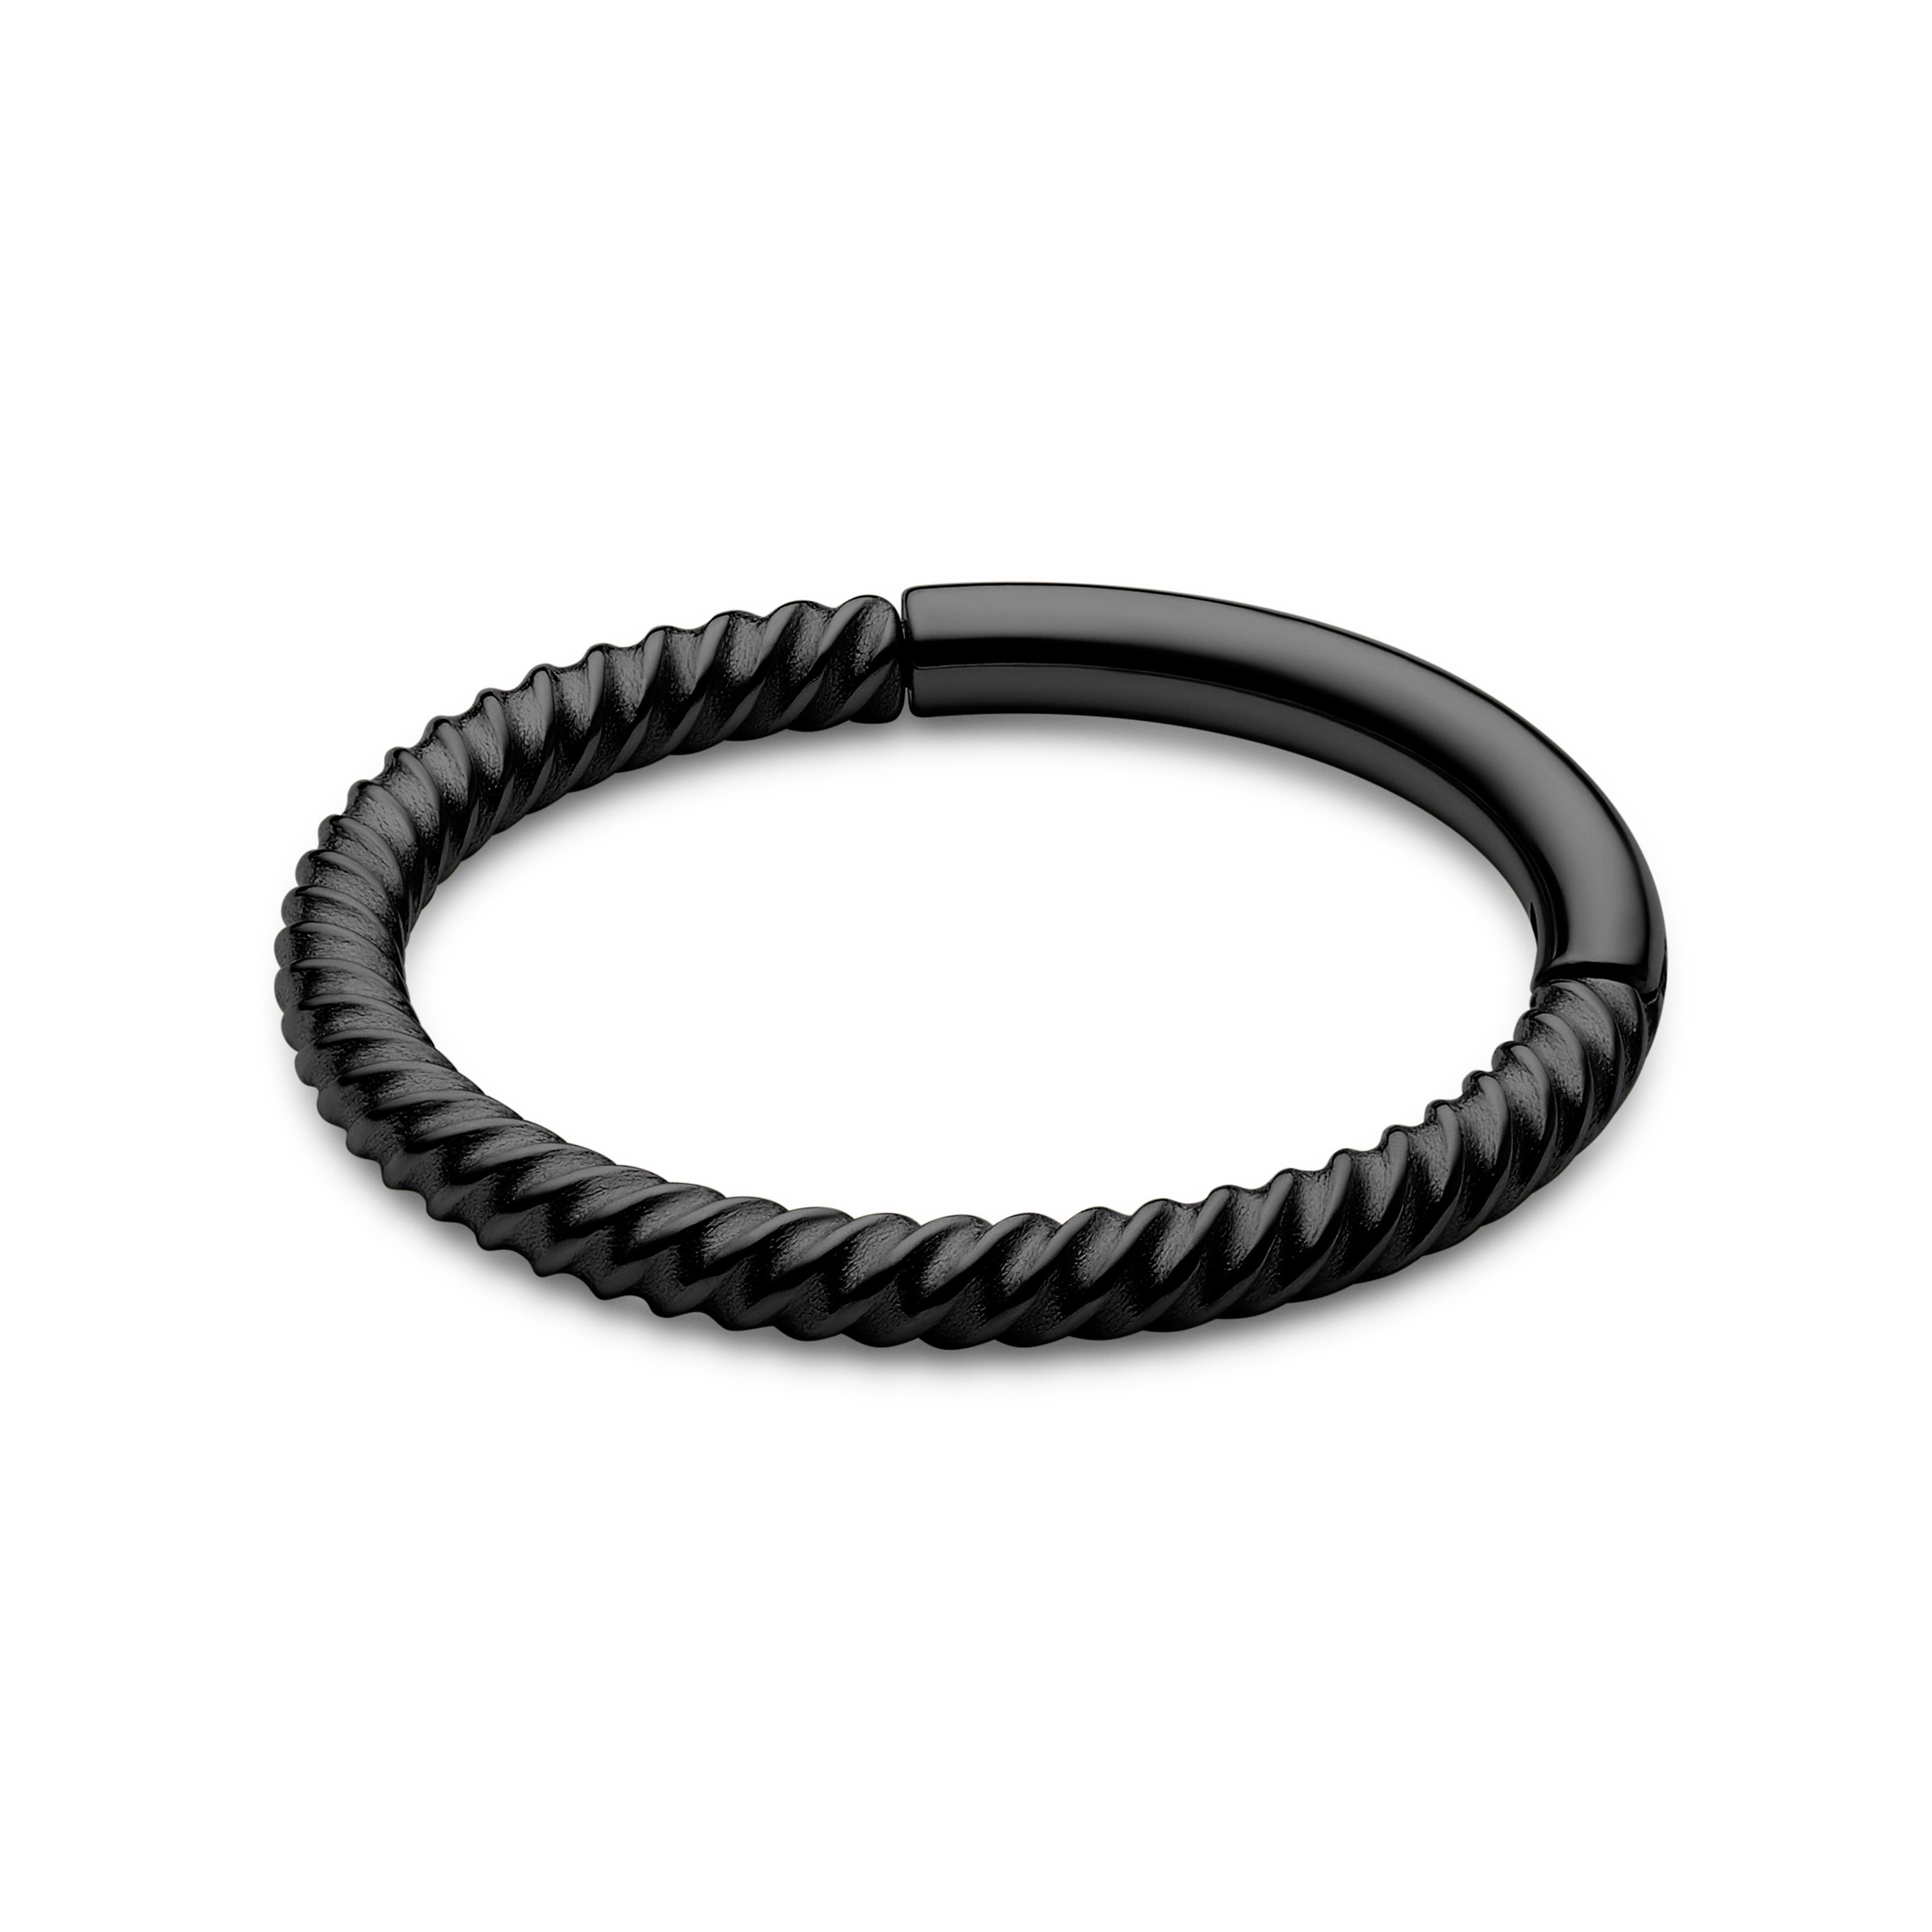 10 mm Black Surgical Steel Wire Piercing Ring